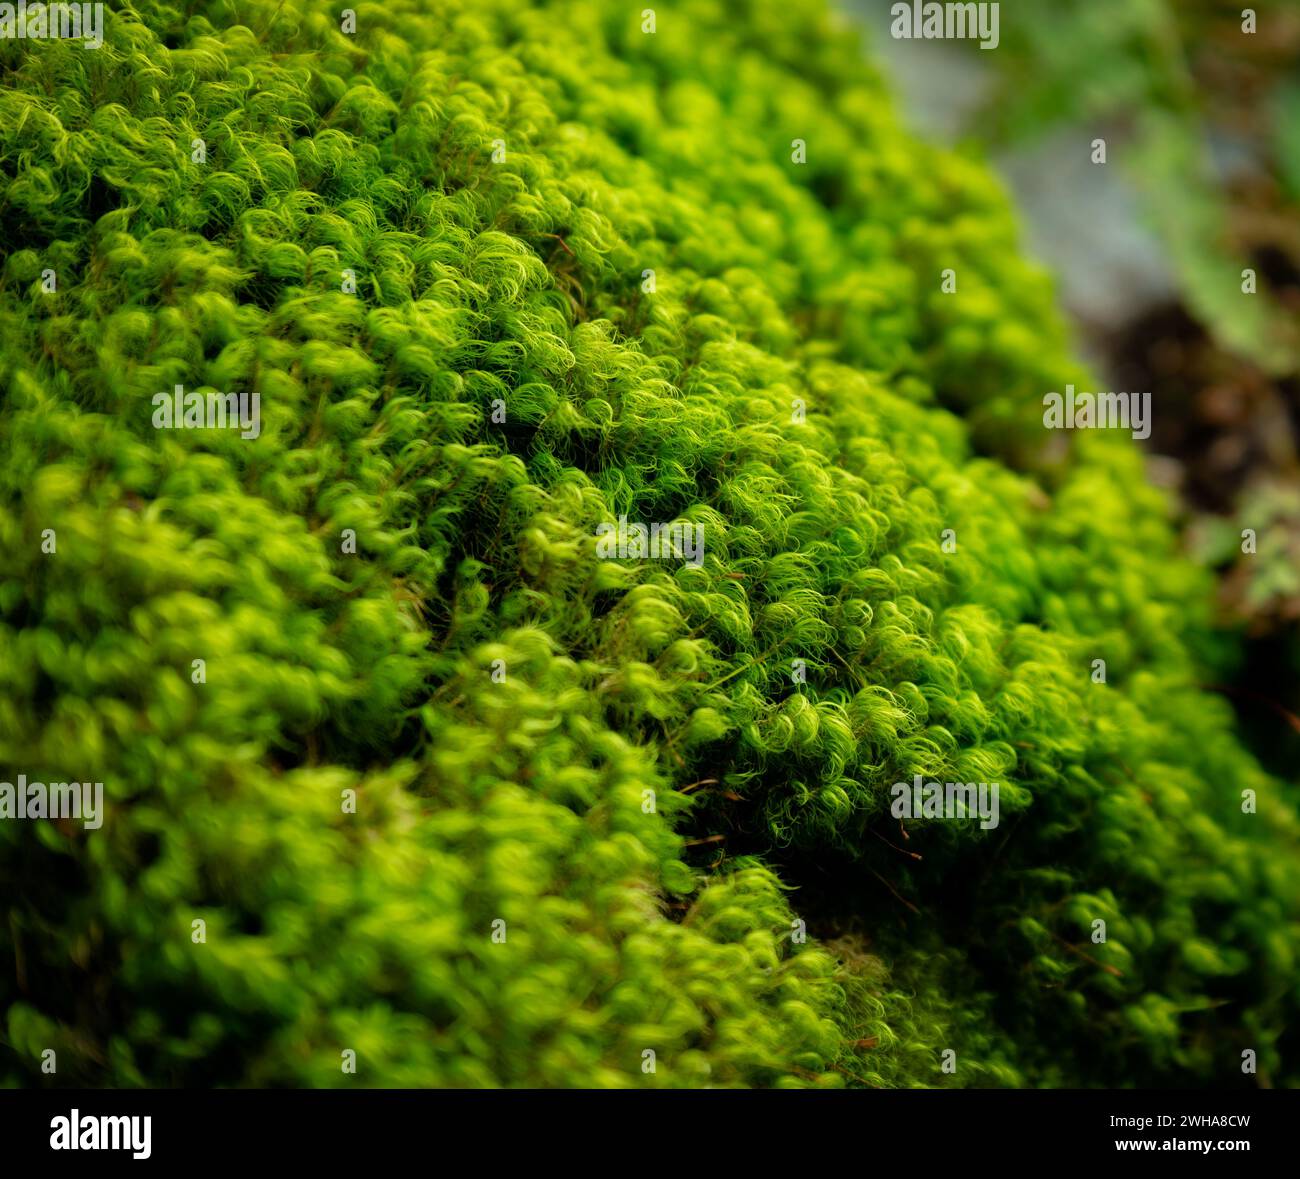 A close-up of vibrant green moss covering the forest floor Stock Photo